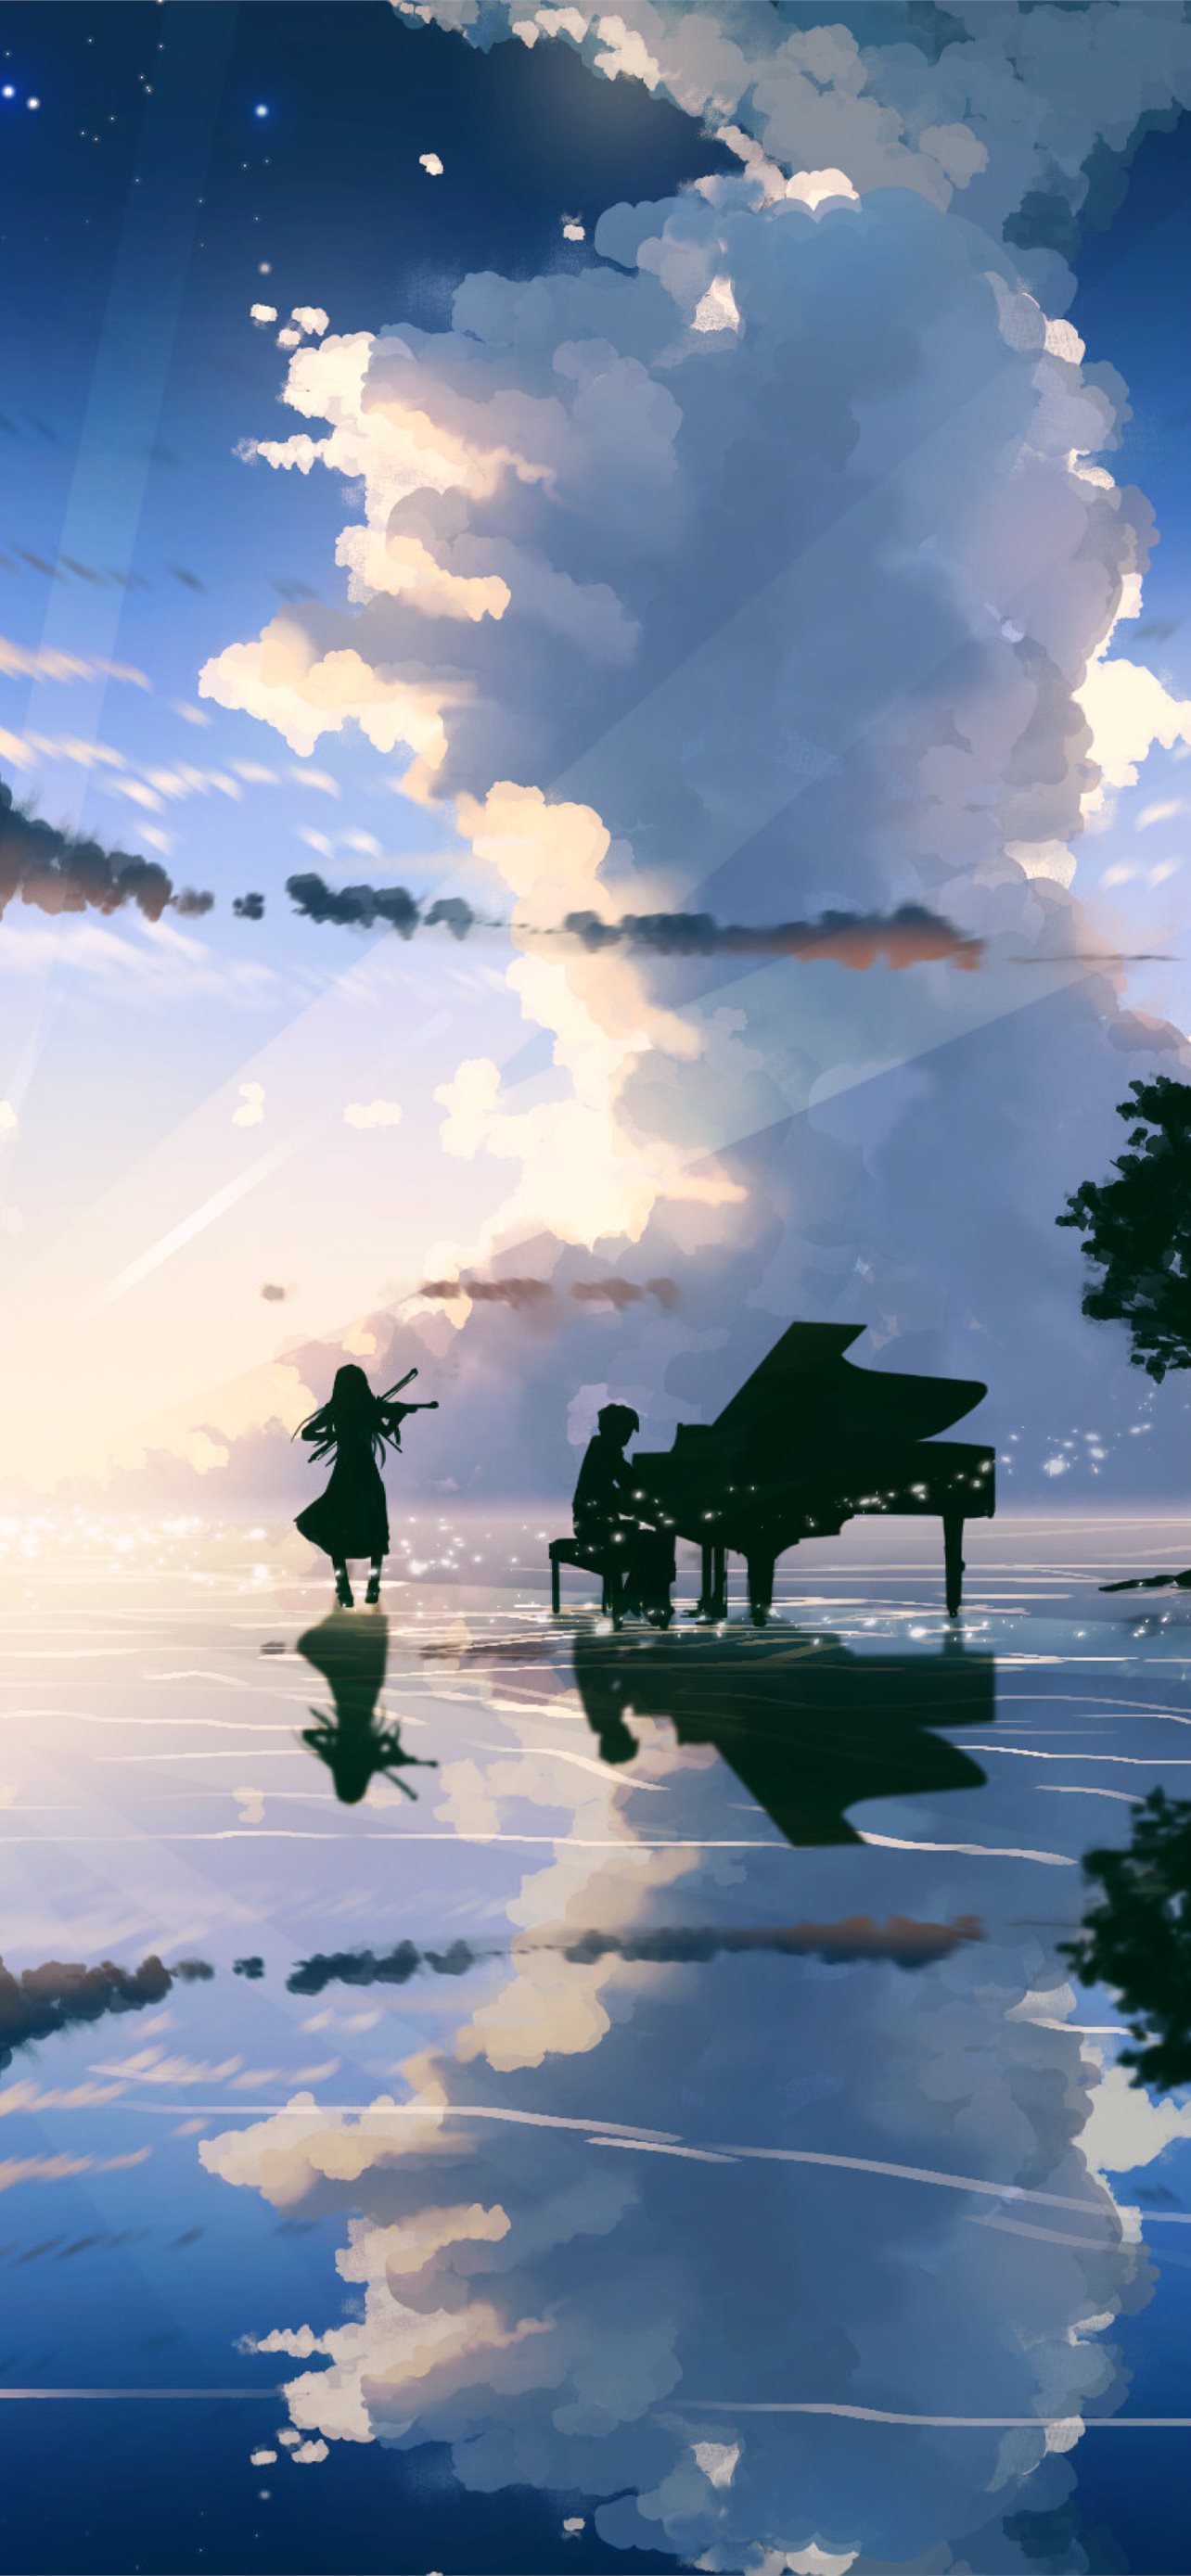 Your Lie In April teahub io iPhone Wallpapers Free Download